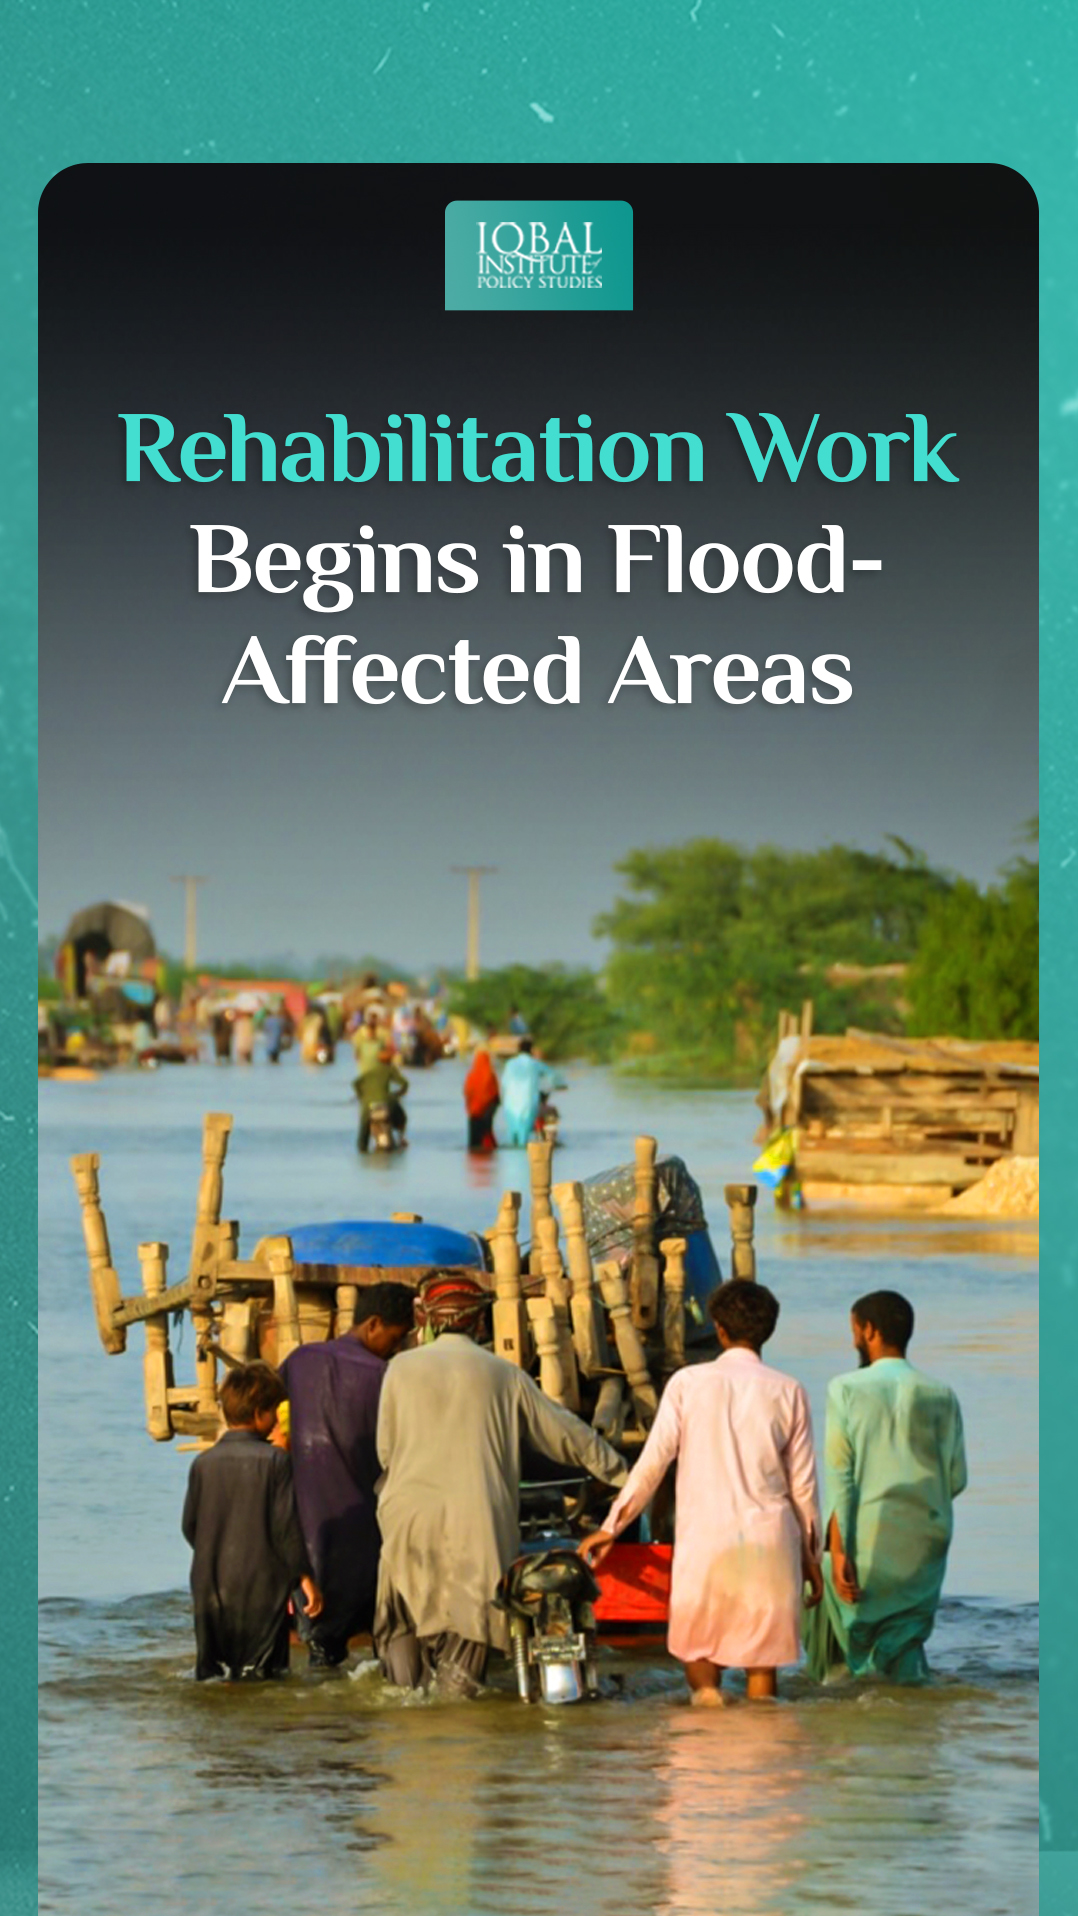 Rehabilitation work begins in flood-affected areas